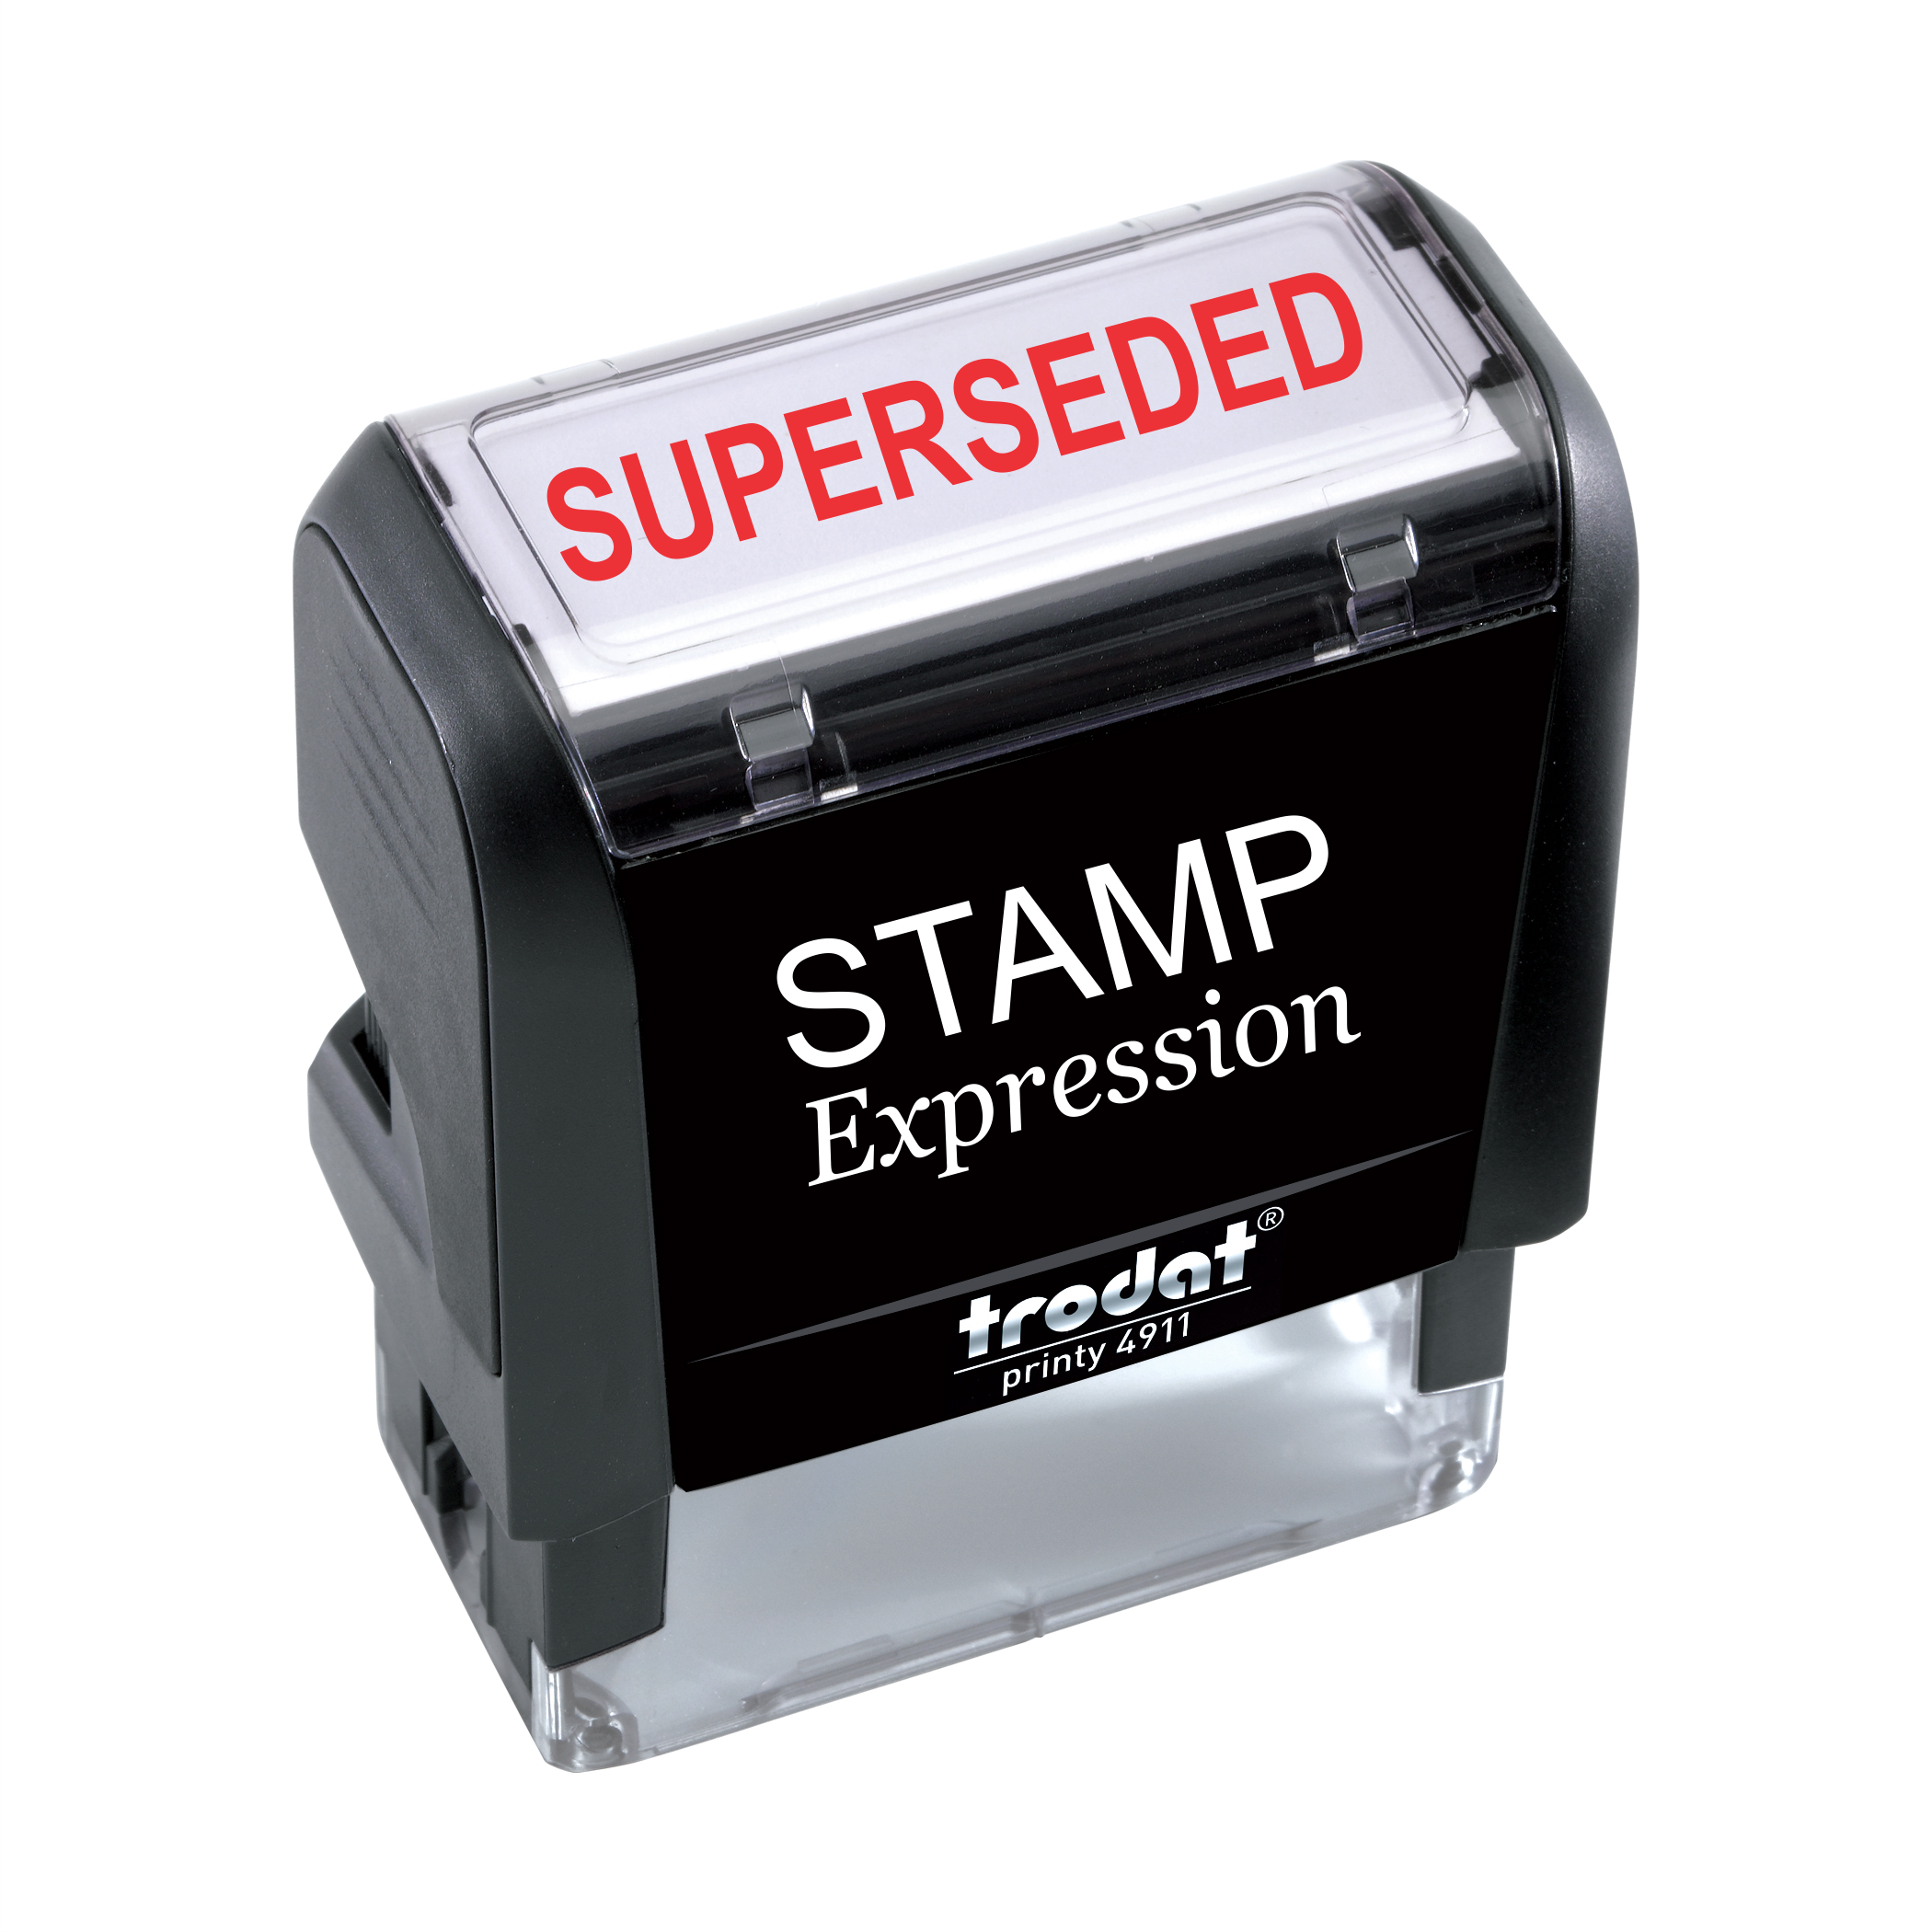 Superseded Office Self Inking Rubber Stamp